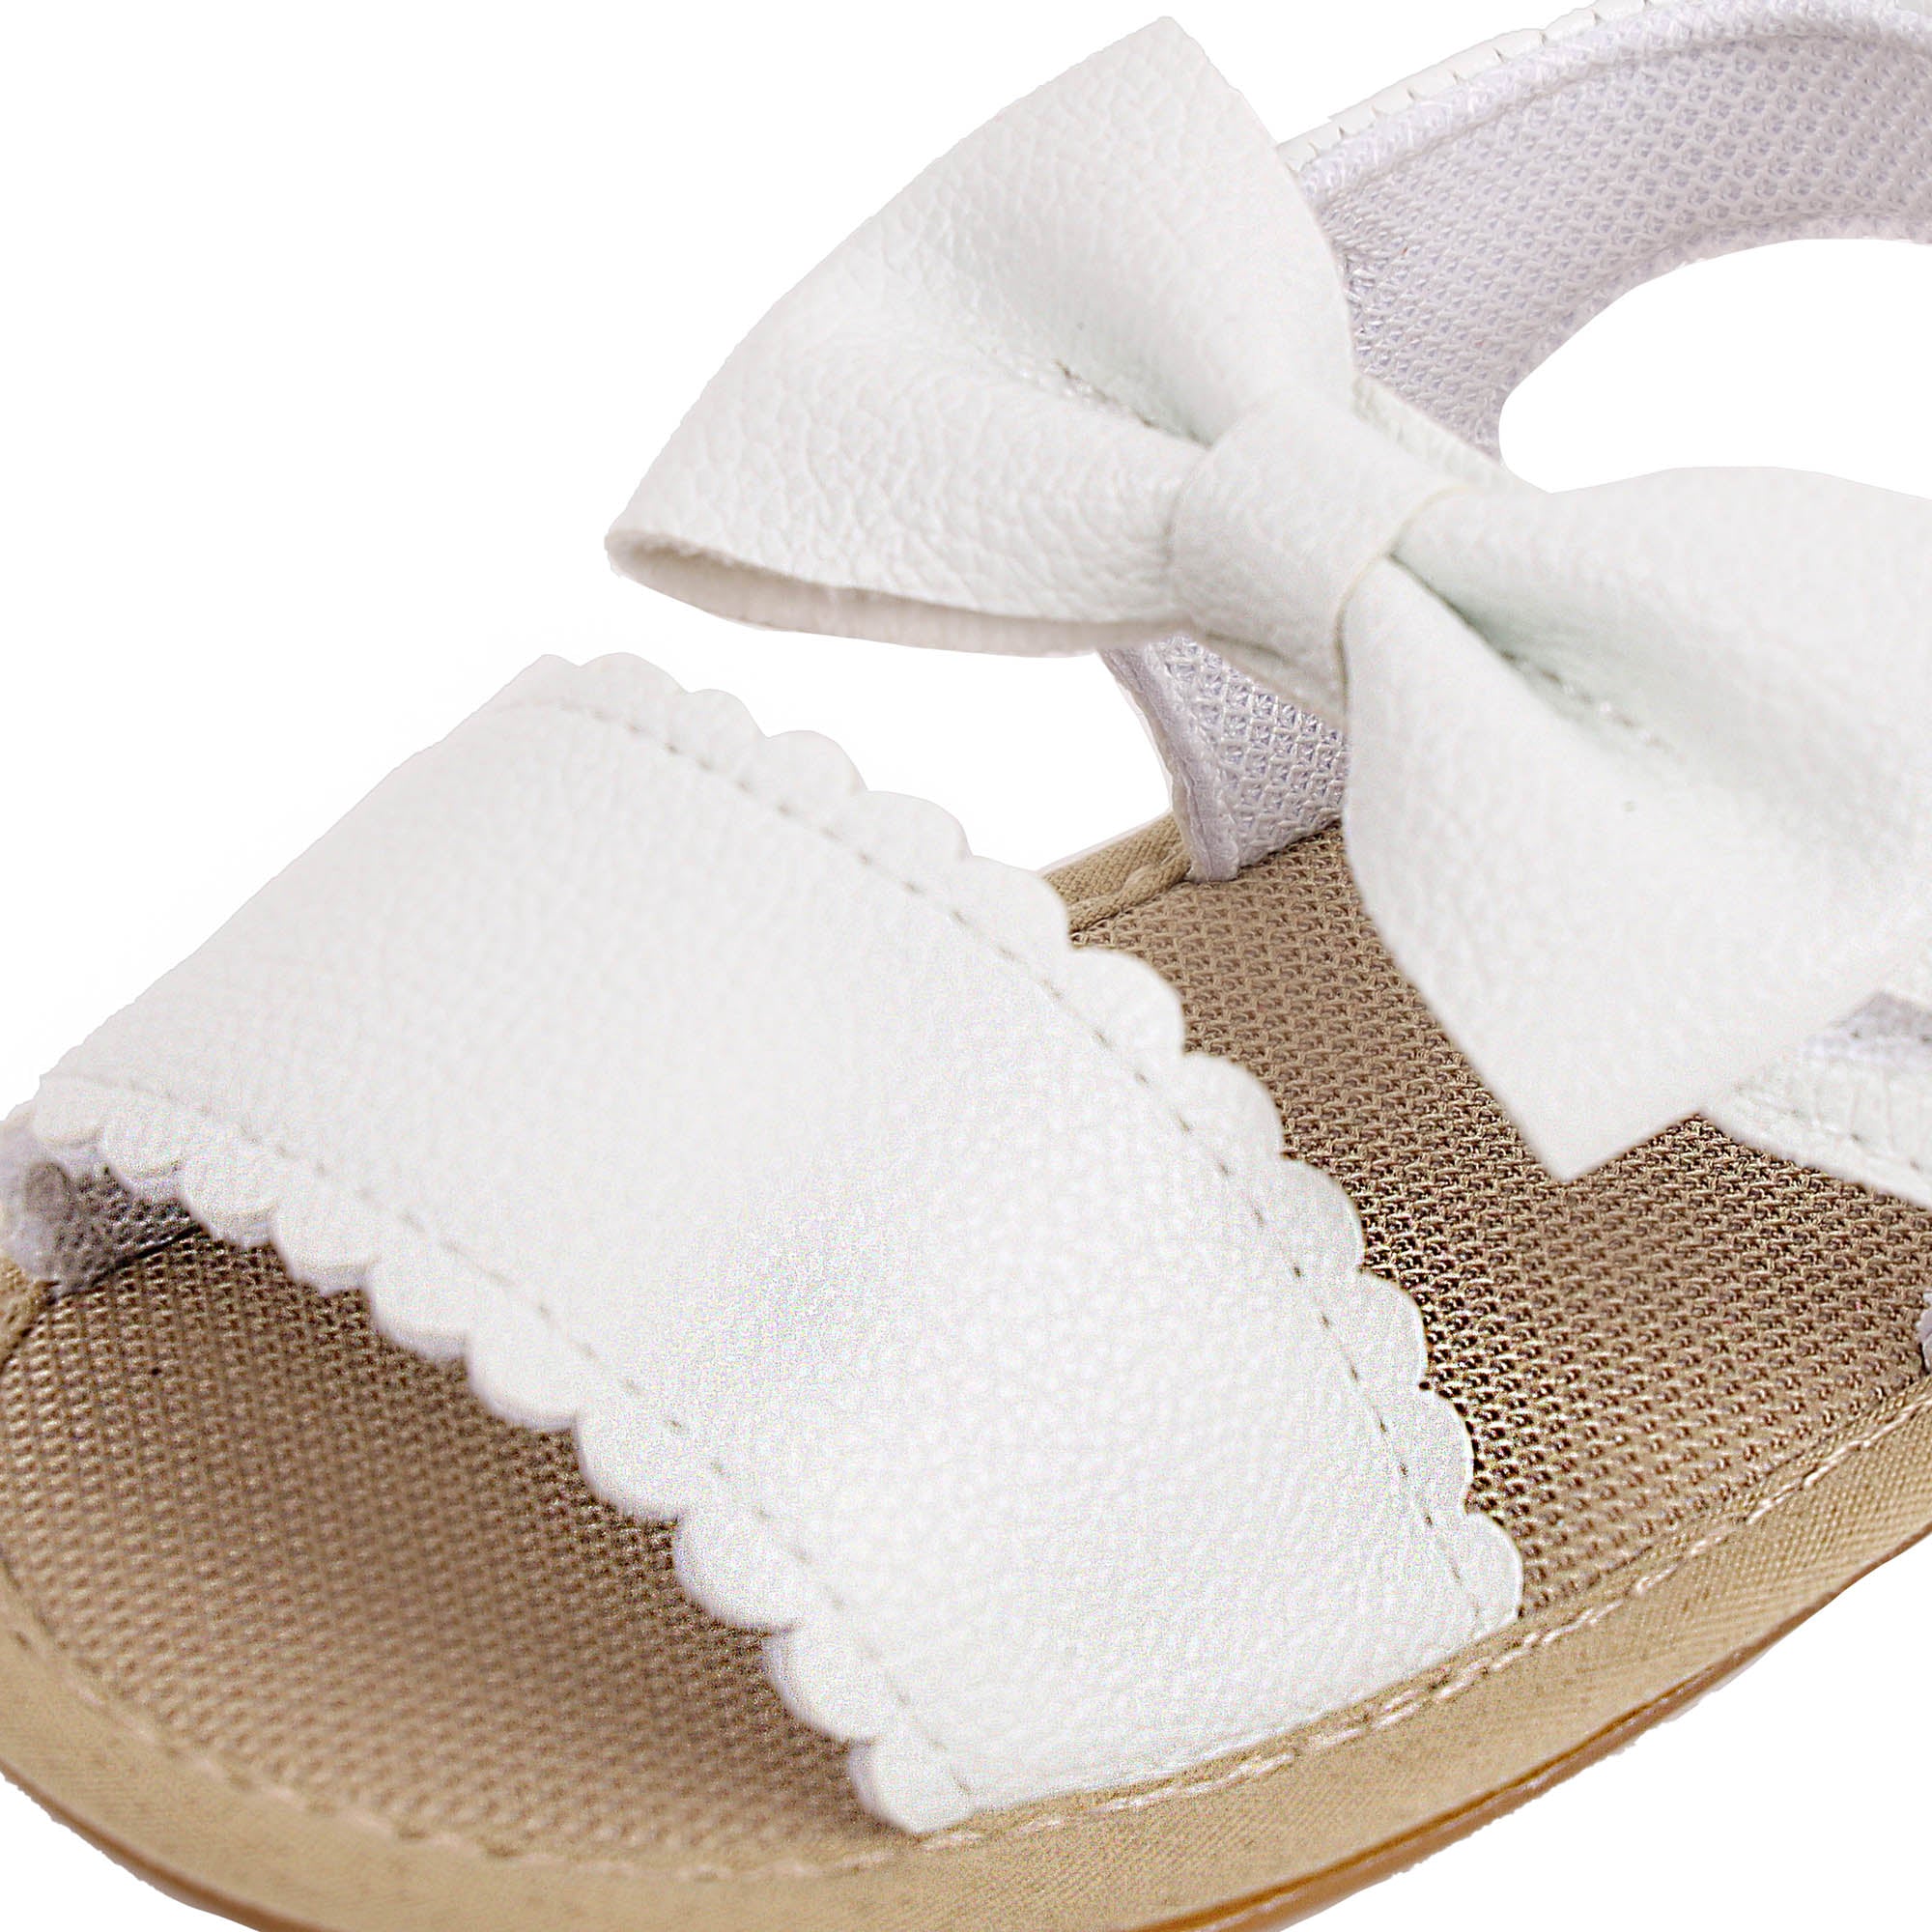 Kicks & Crawl- The Twisted Bow White Bow Sandals